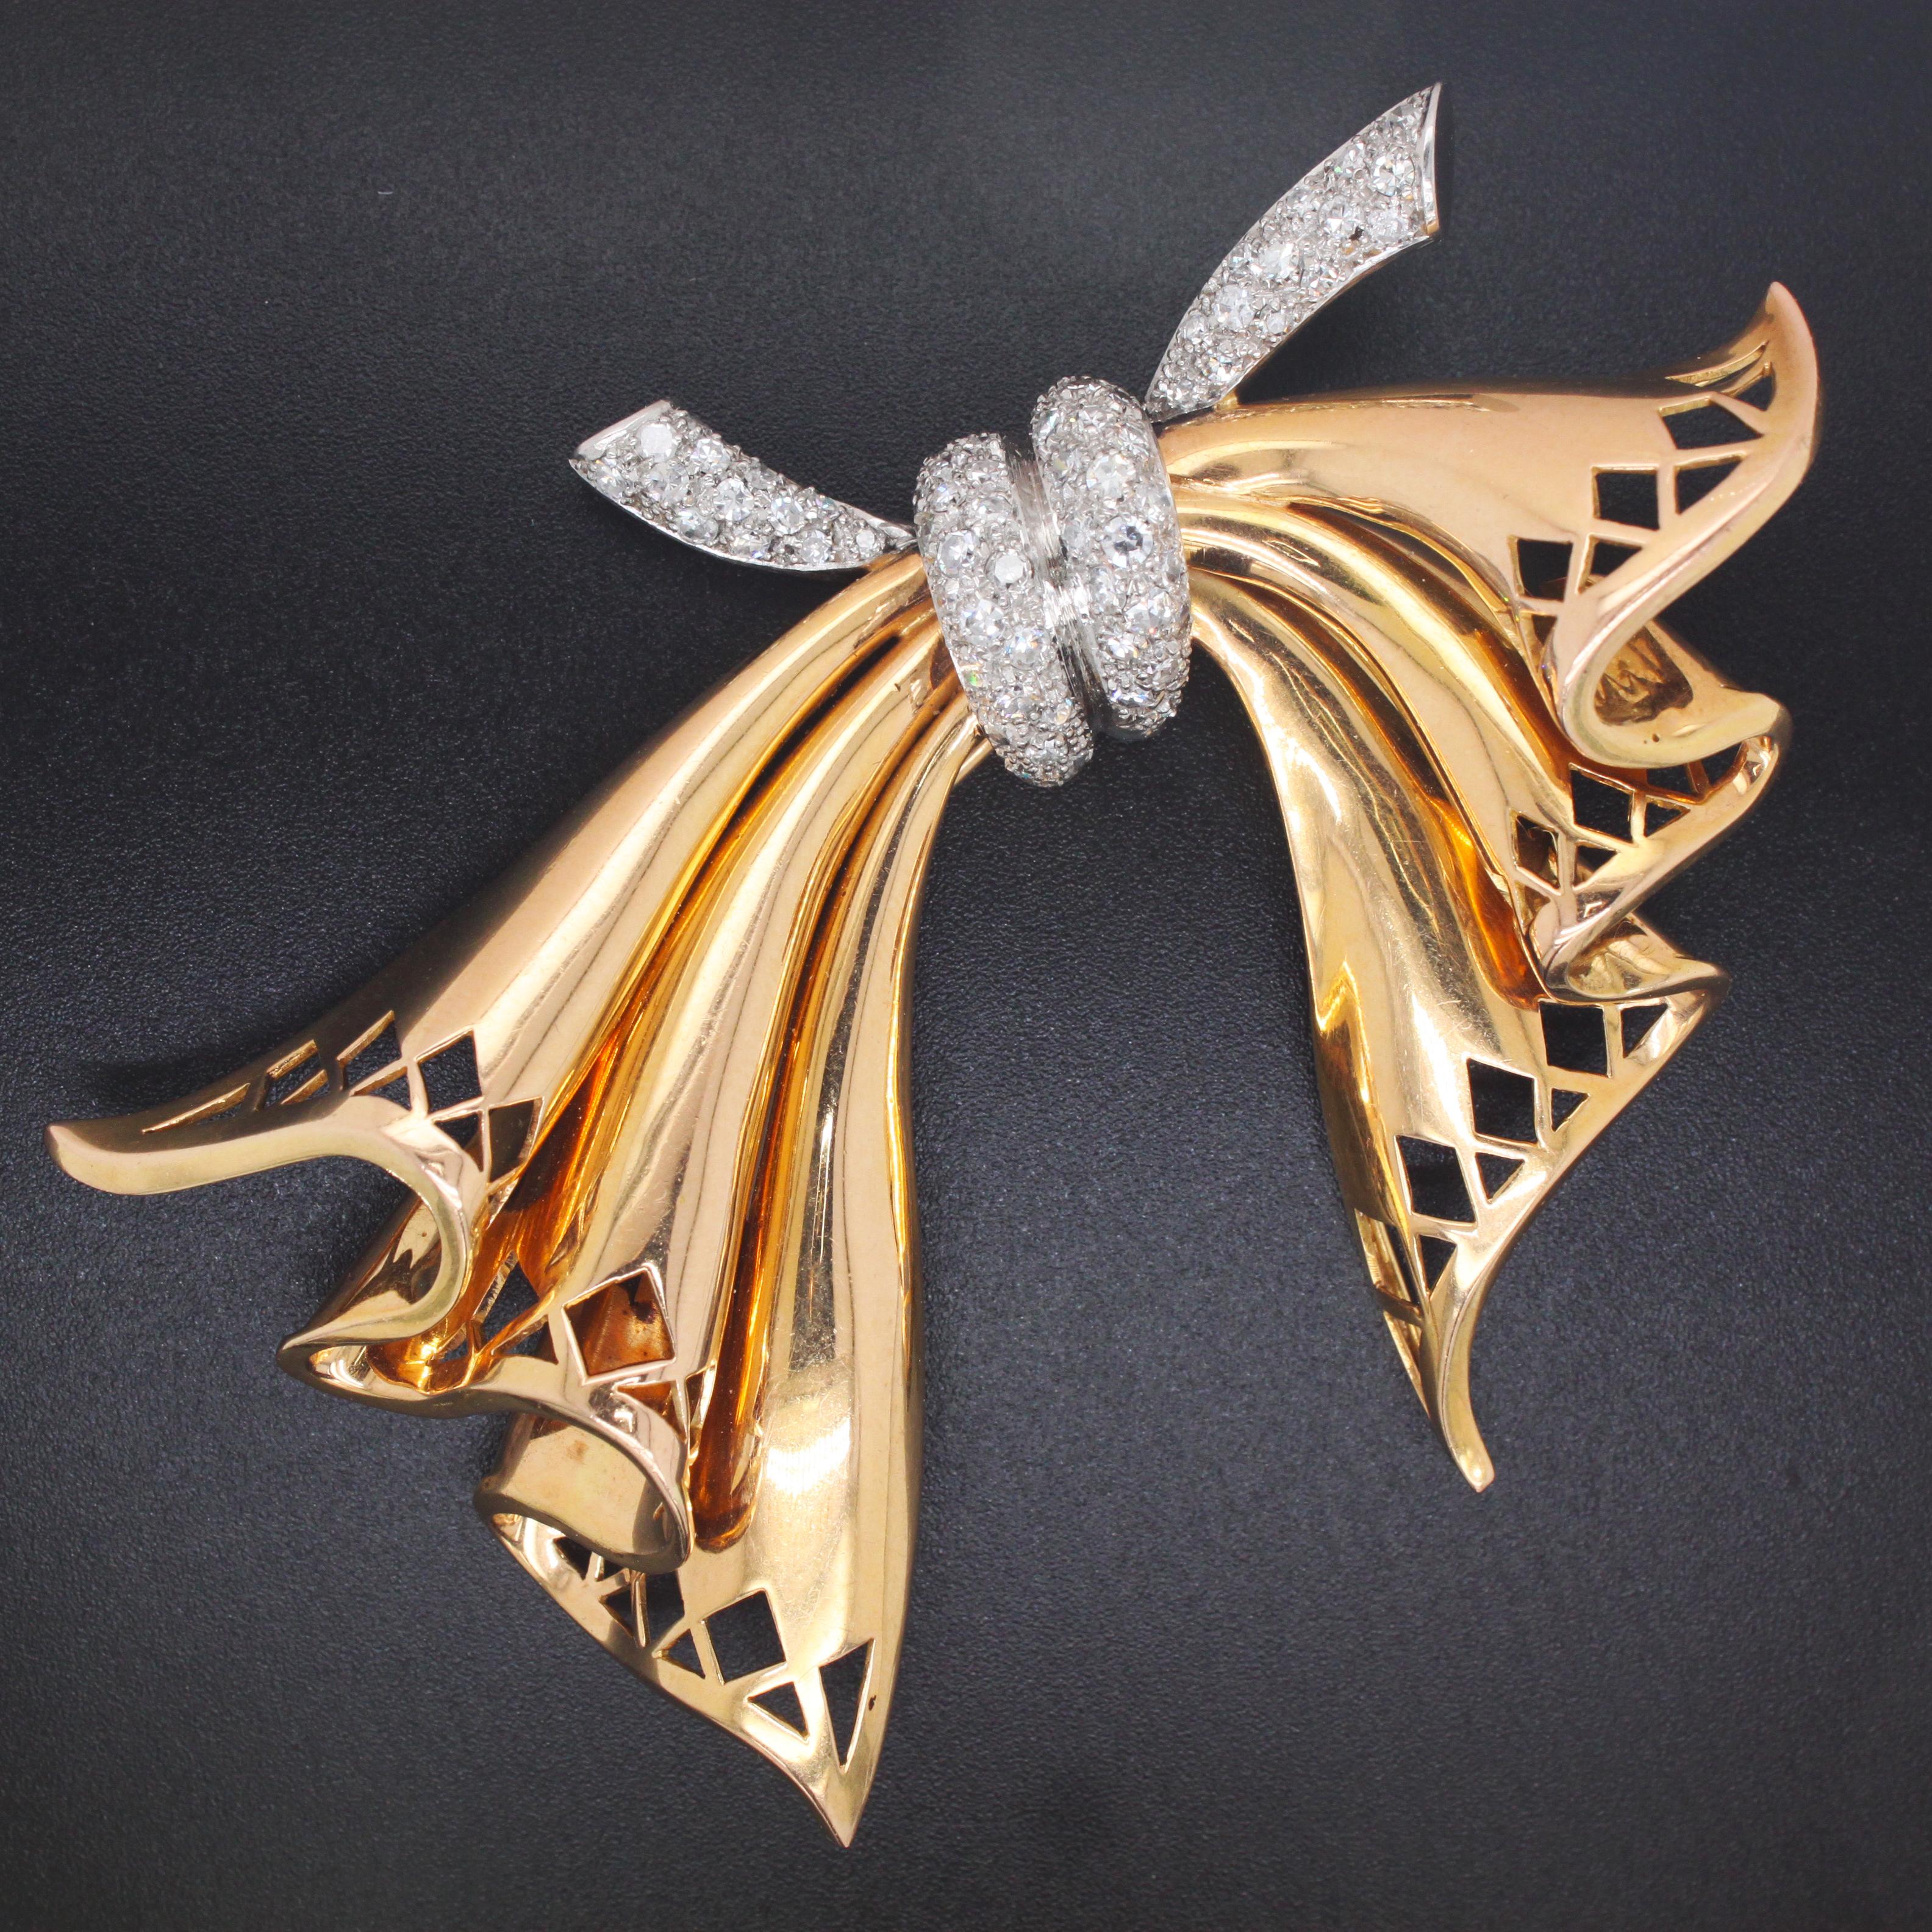 A big diamond and yellow gold Retro bow brooch, 1960s. The ribbons are made in gold and have a beautiful kite and triangular cut design at the respective ends. The upper portion of the bow is set with small single cut diamonds in a pavé setting. The